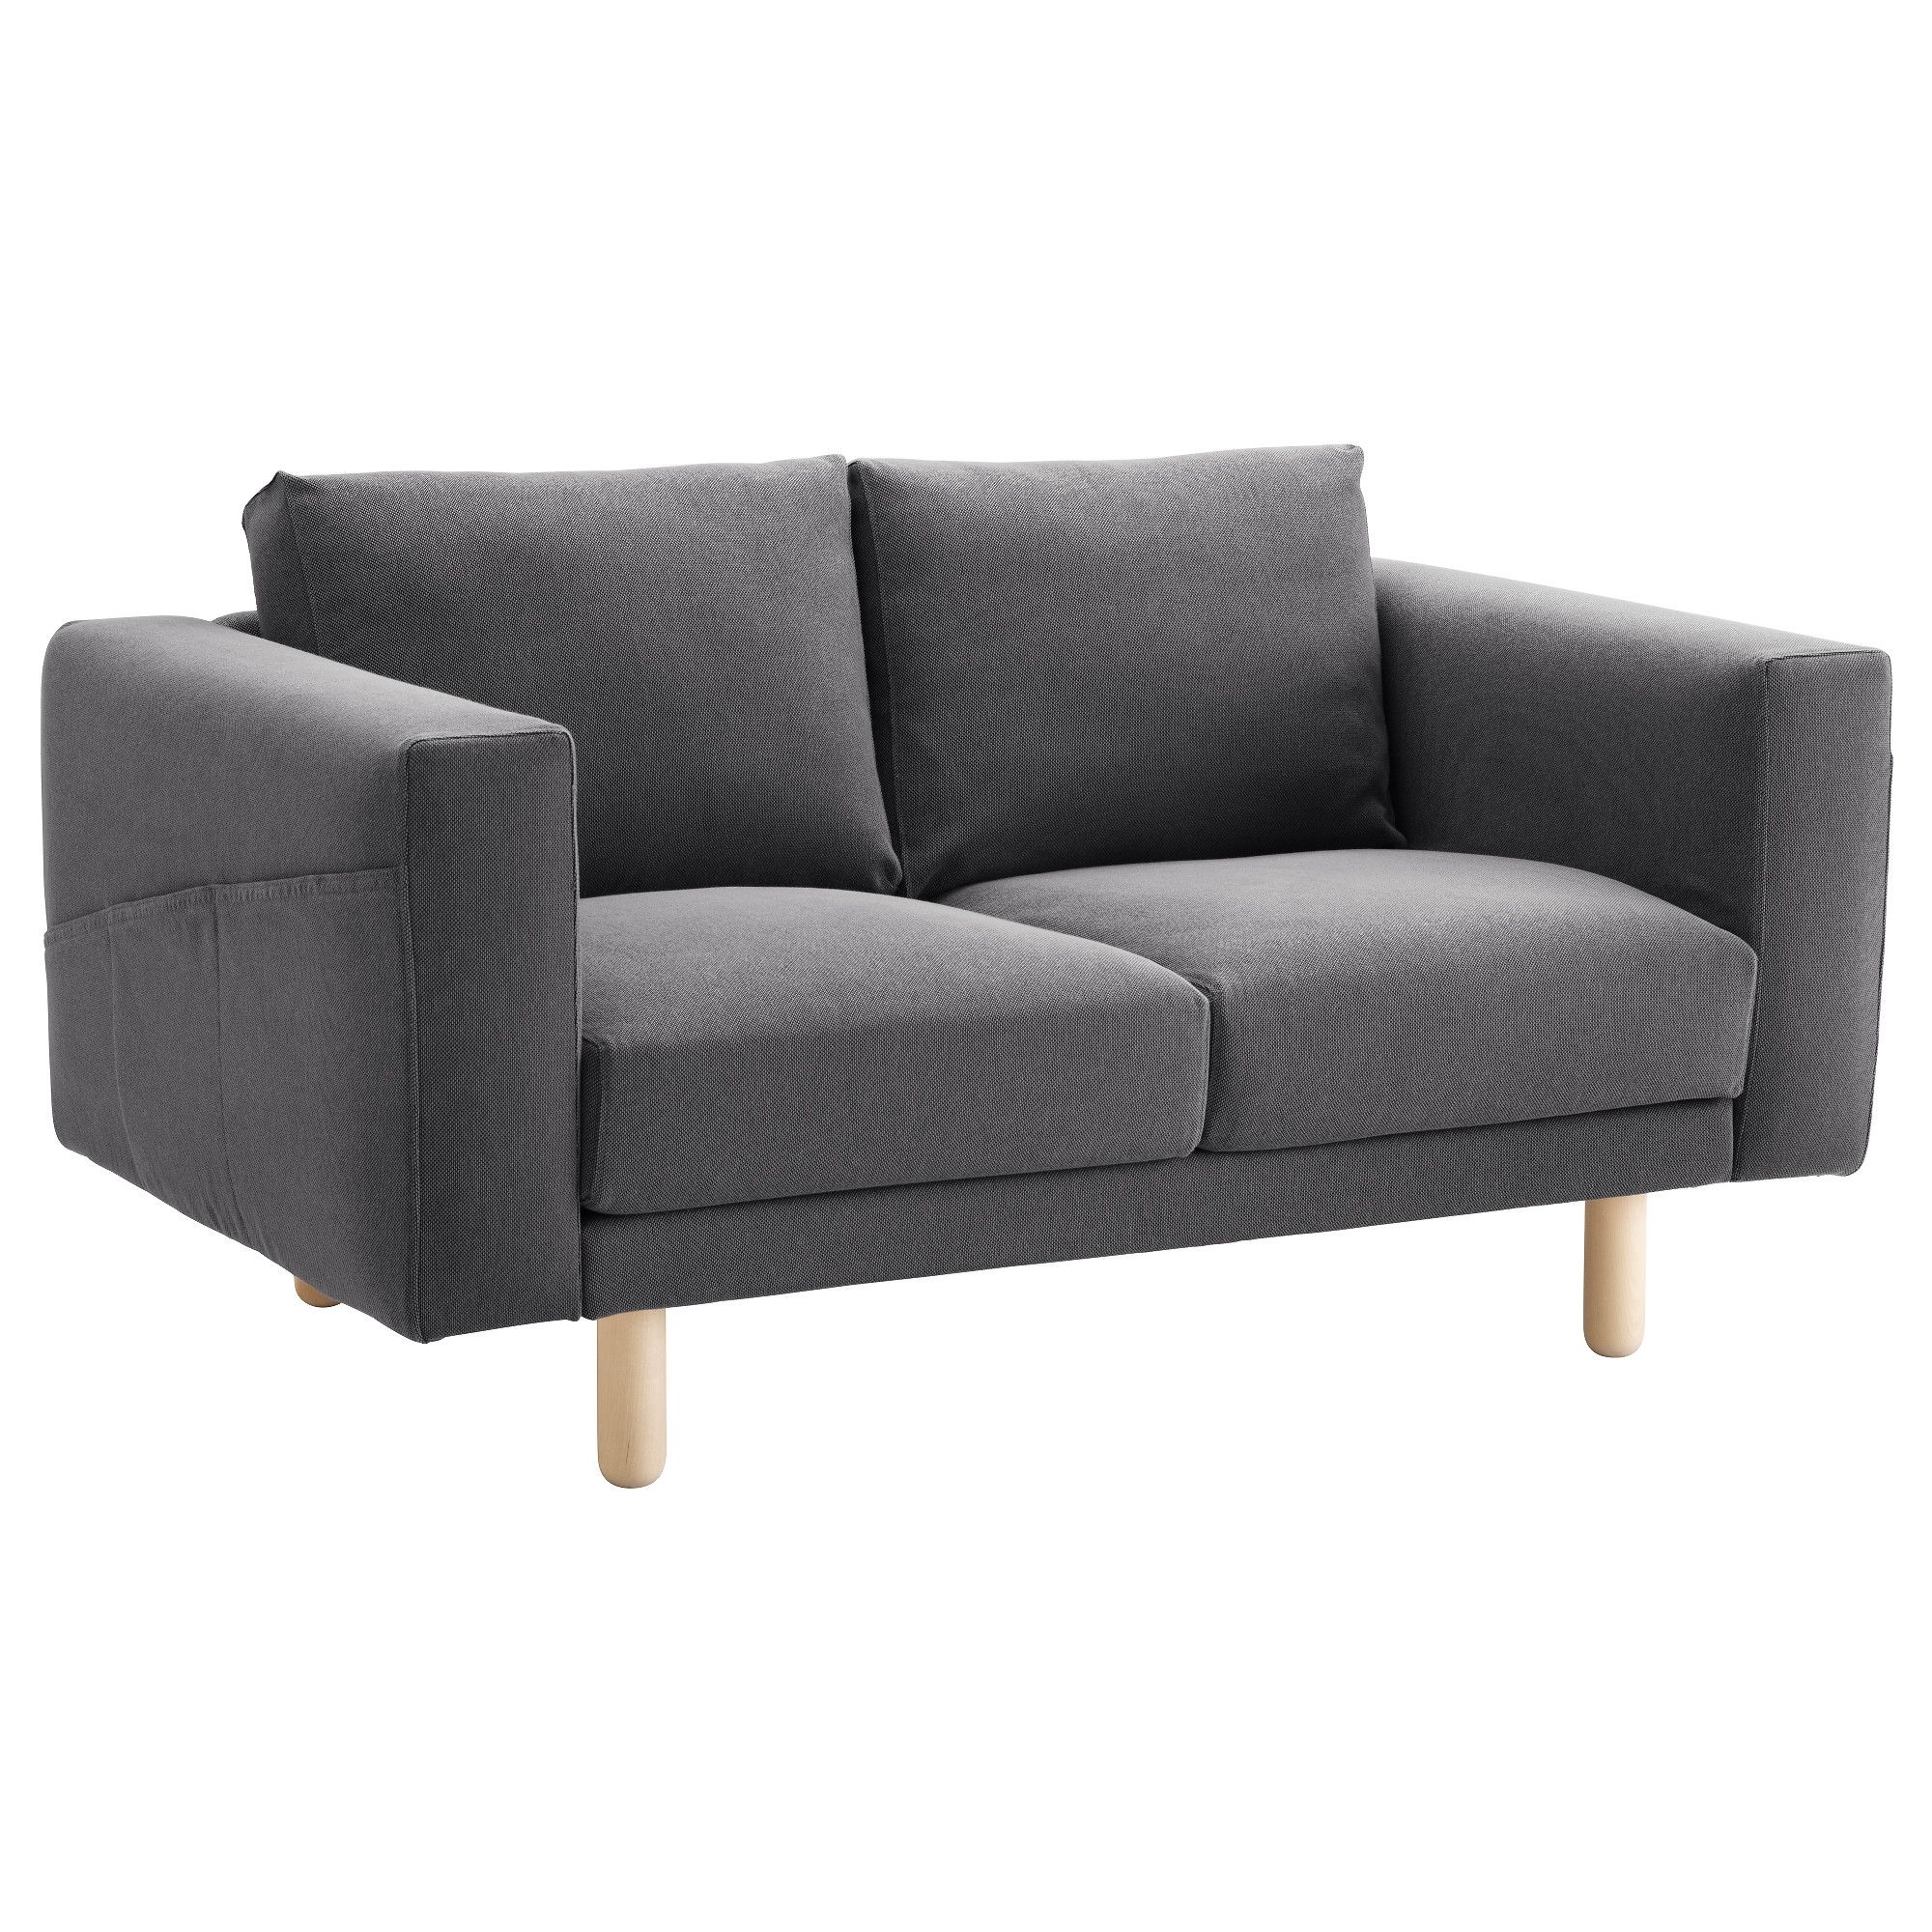 Well Known Norsborg Cover For 2 Seat Sofa Finnsta Dark Grey – Ikea Within Small 2 Seater Sofas (View 1 of 20)